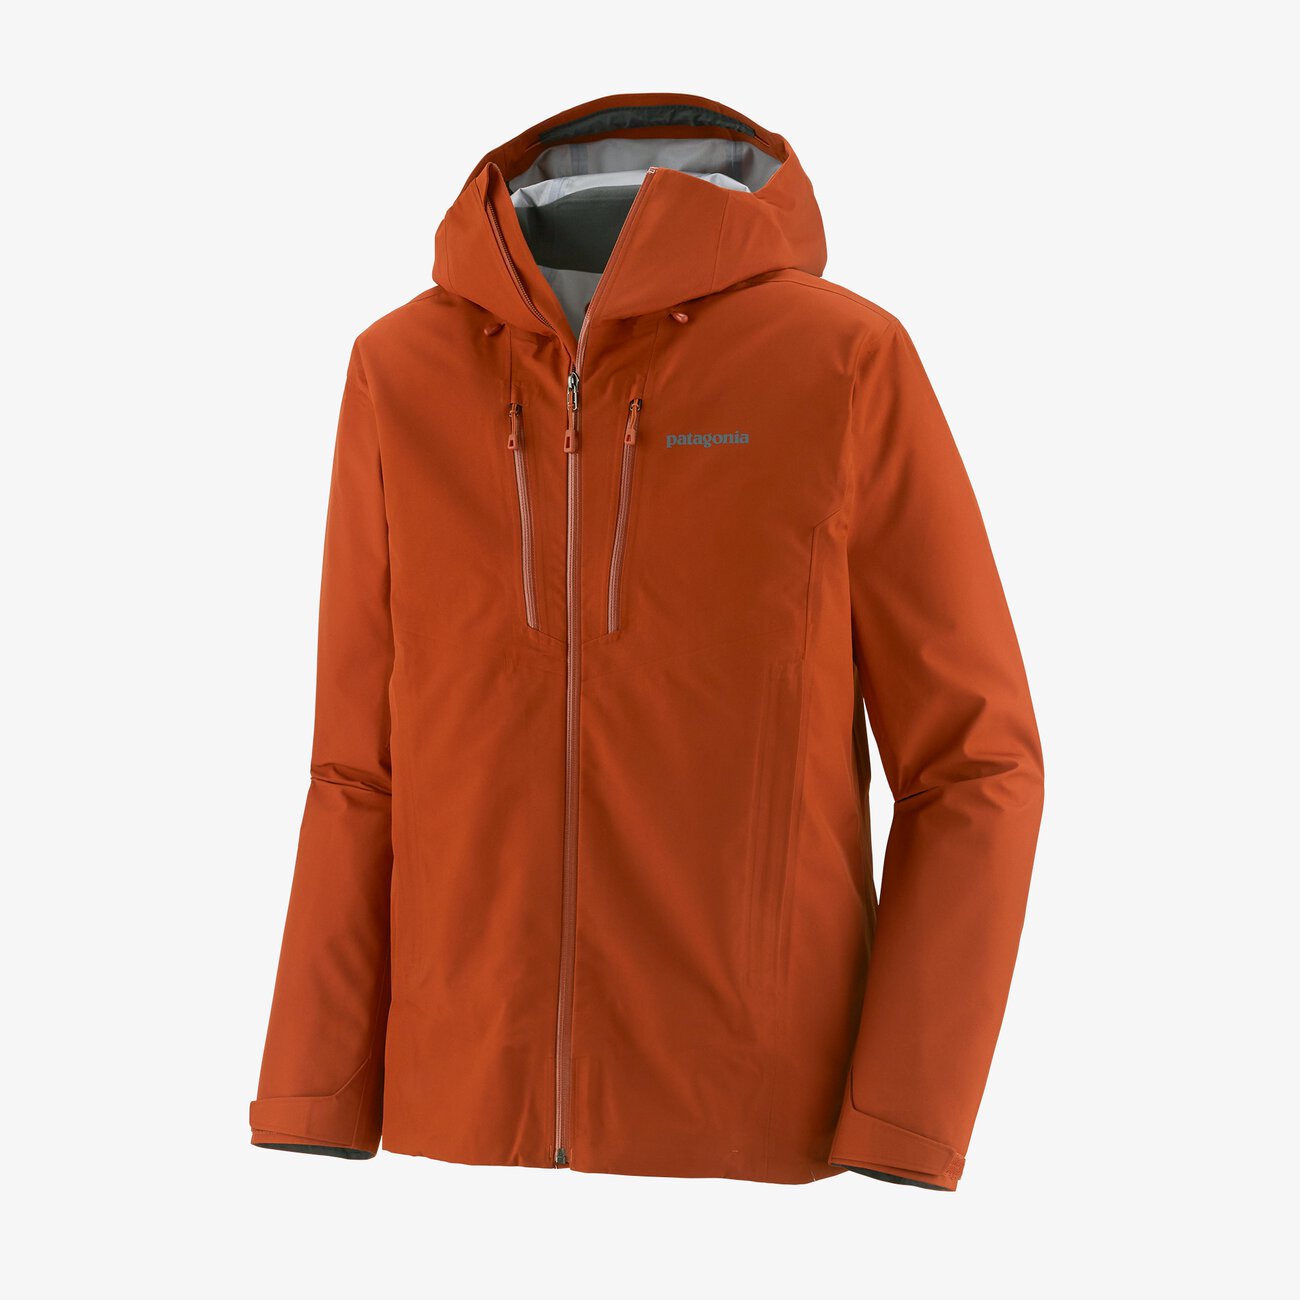 Men's Climbing Clothing & Gear by Patagonia